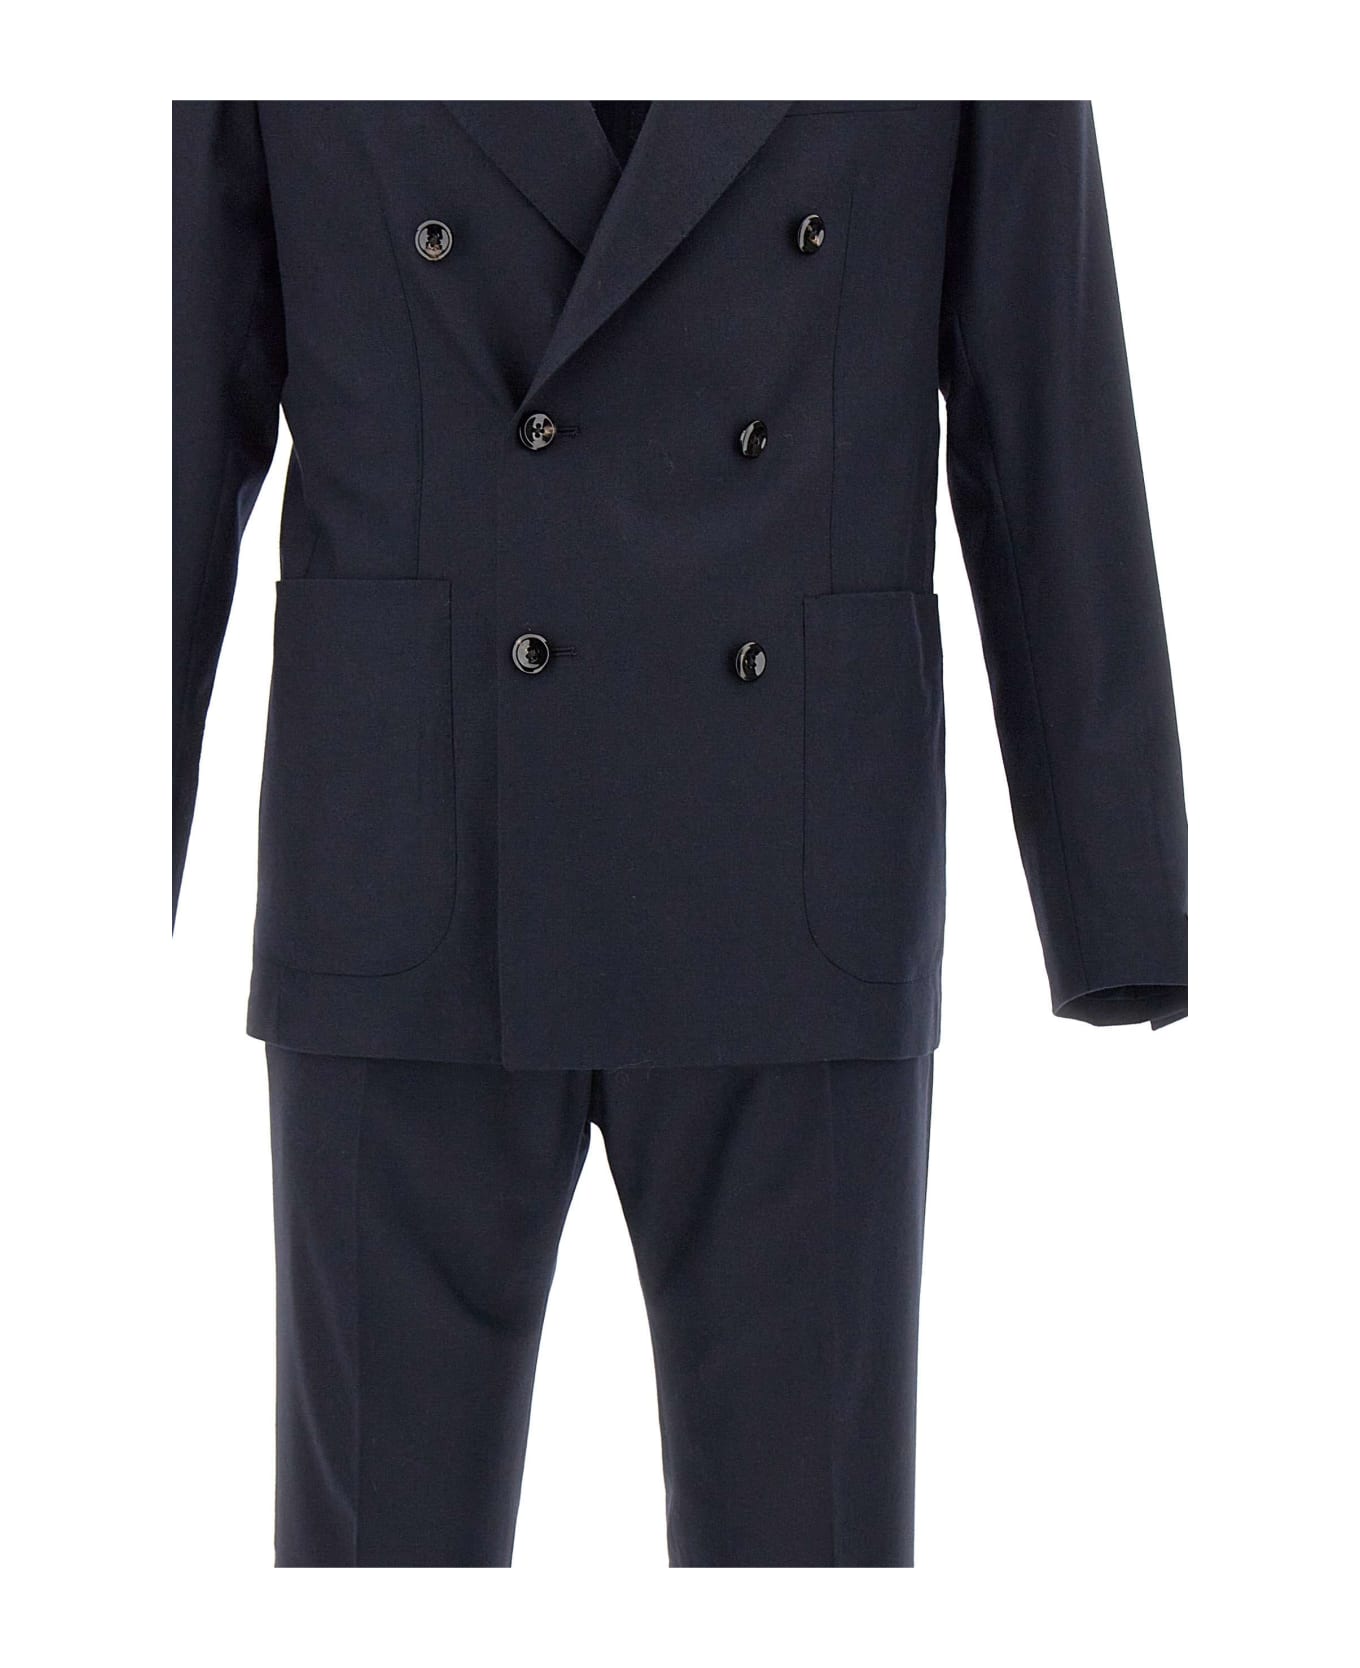 Tagliatore Wool And Cashmere Suit - BLUE スーツ